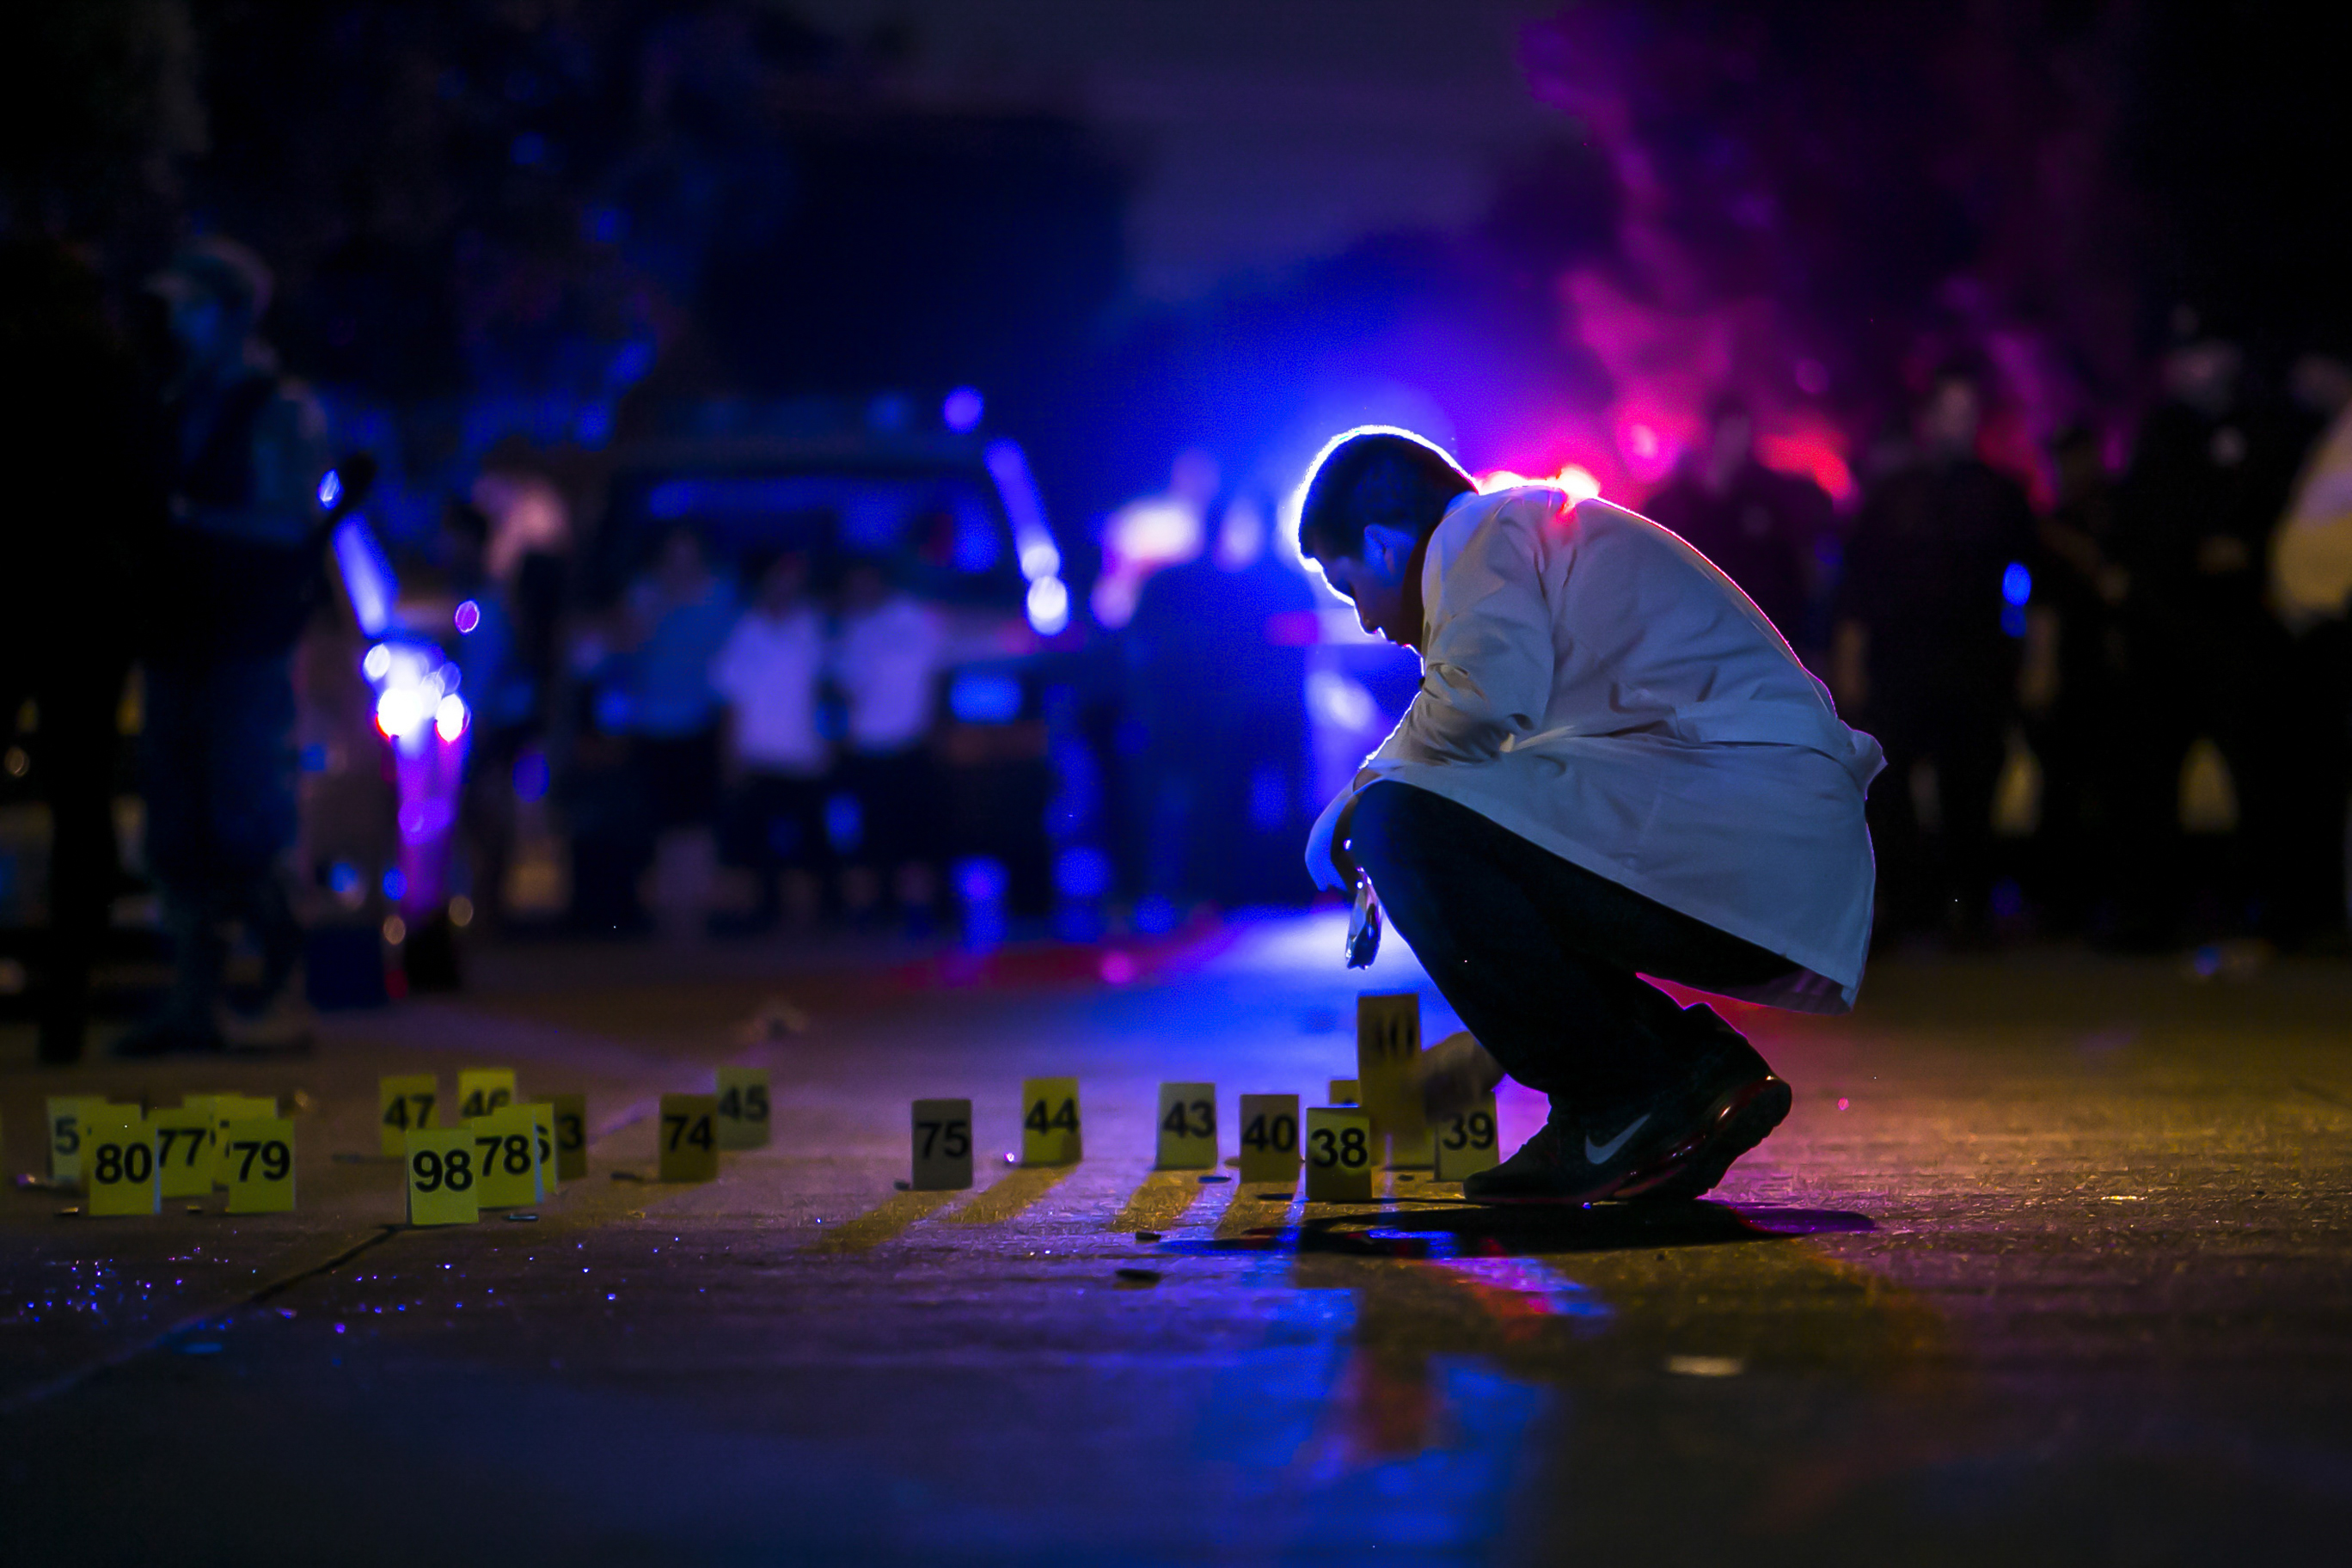 night scene of forensics expert arranging numbered cards on ground